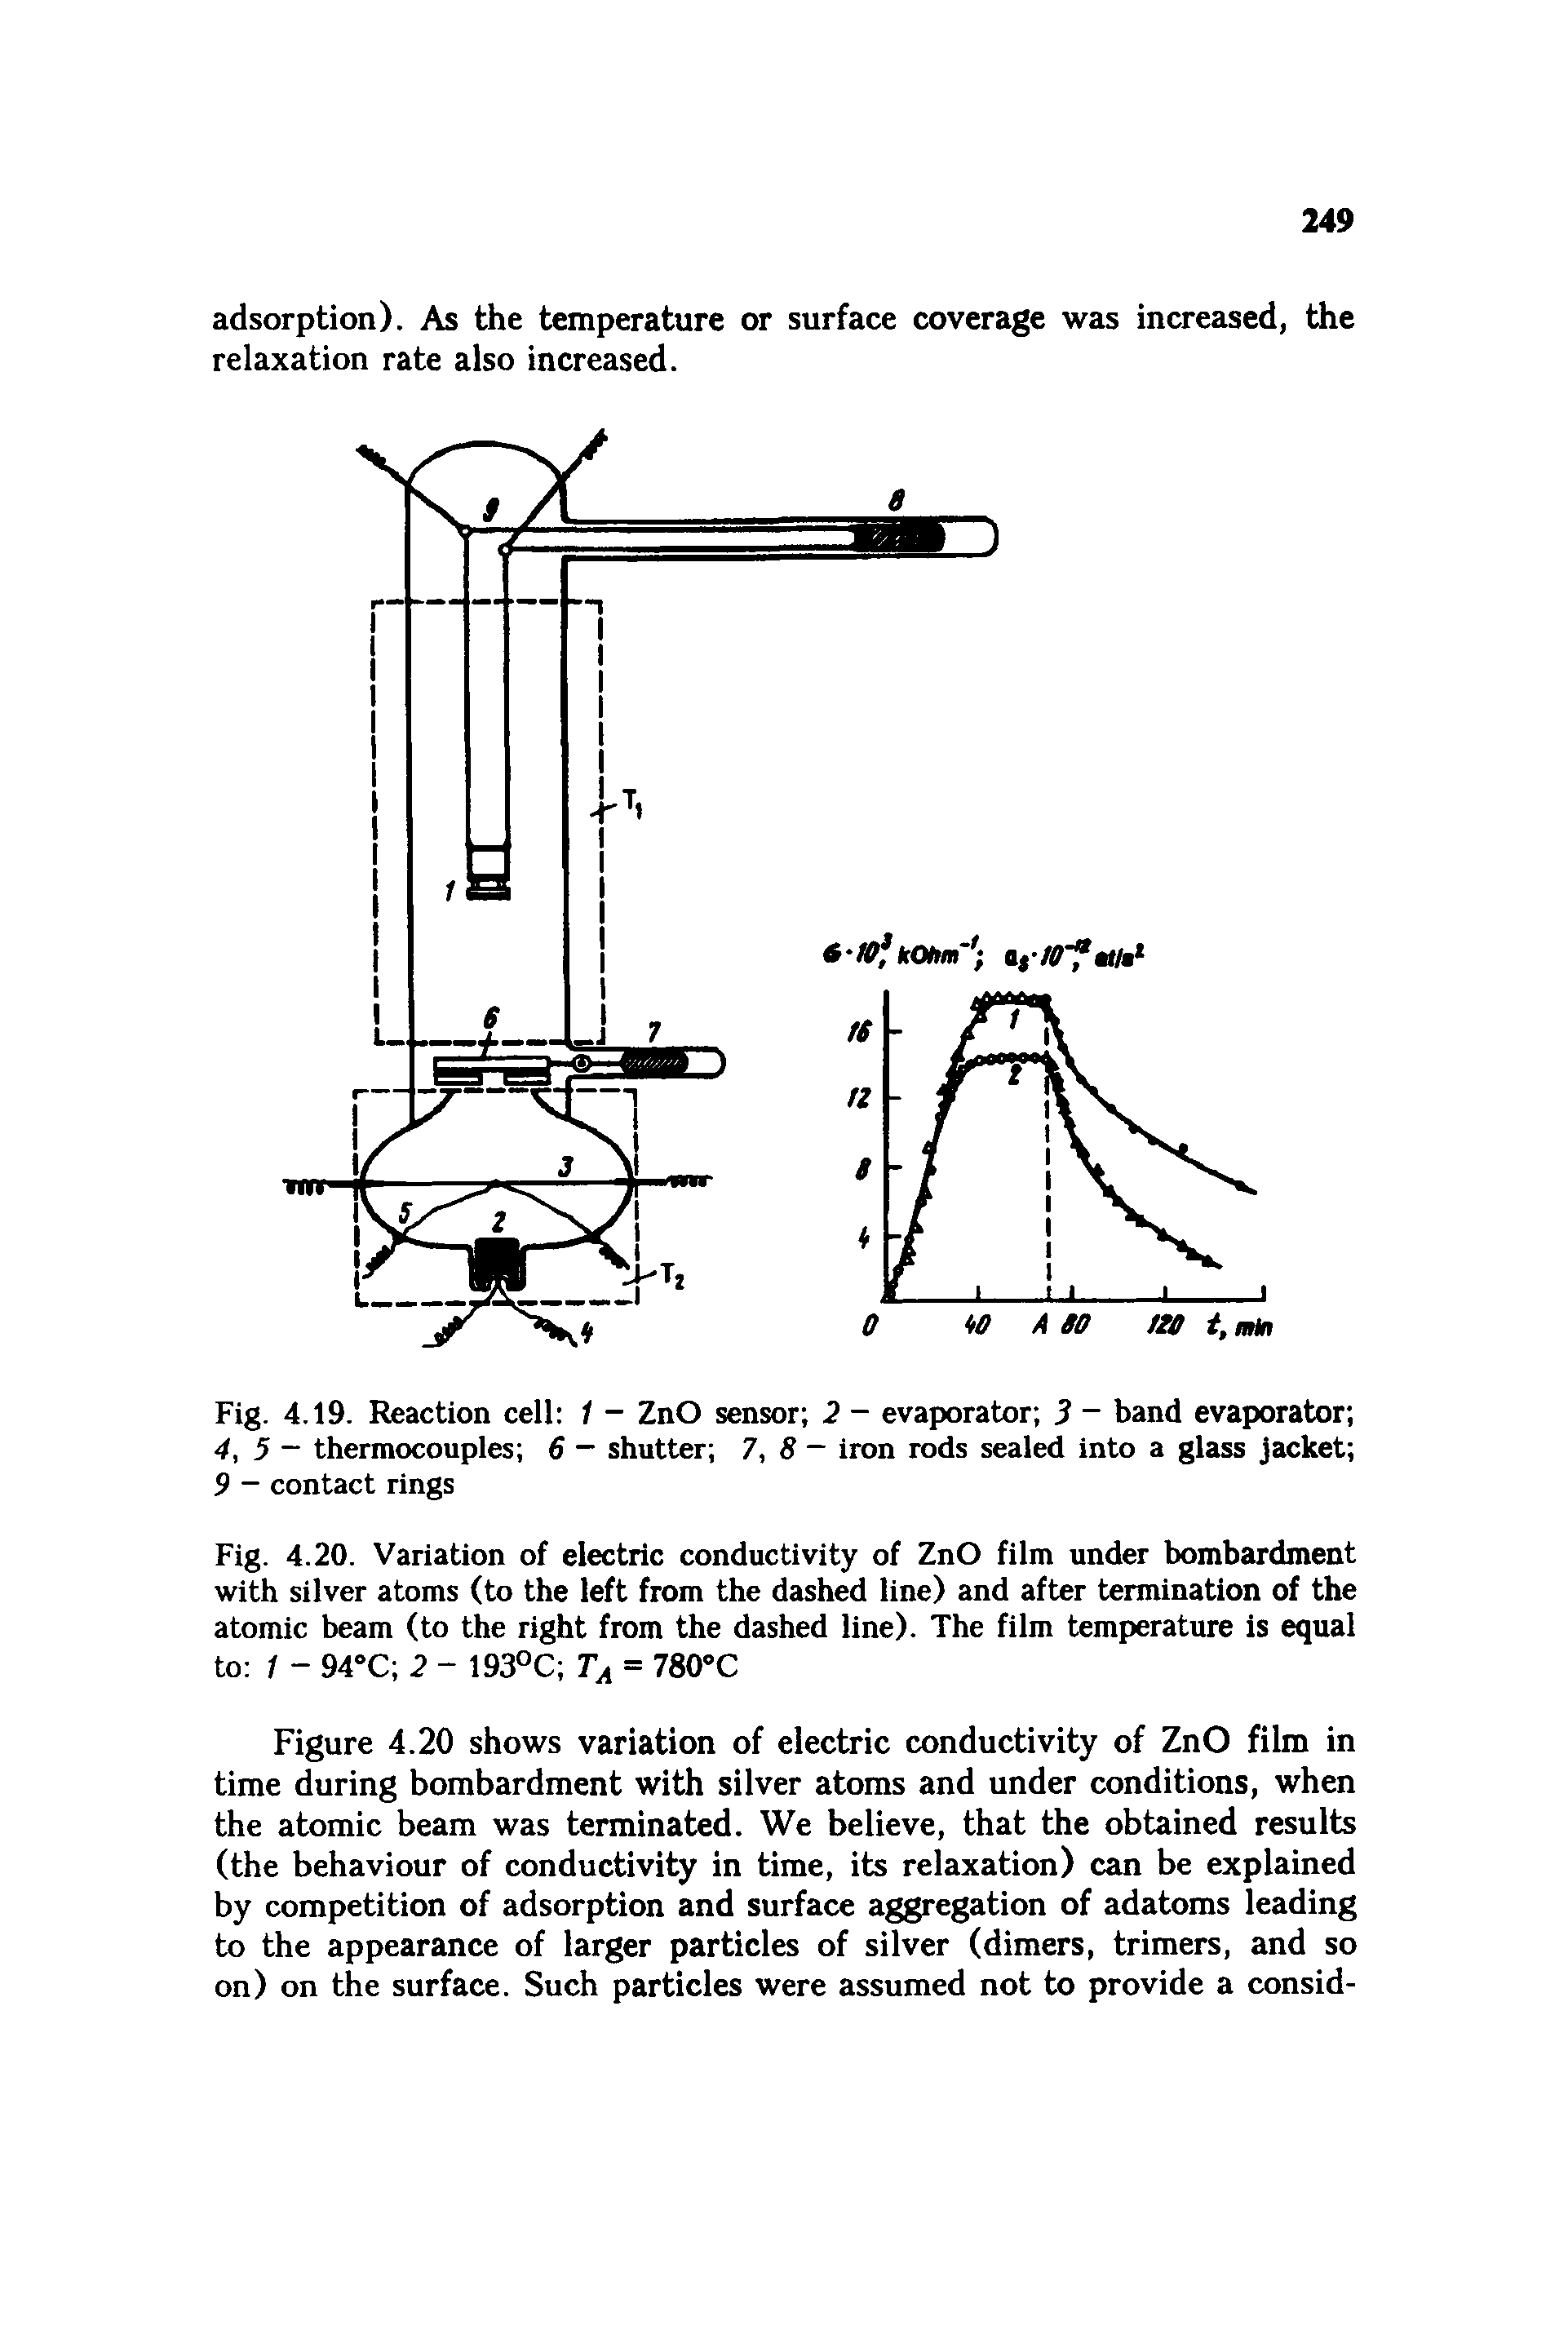 Fig. 4.19. Reaction cell 1 - ZnO sensor 2 - evaporator 3 band evaporator 4, 5 - thermocouples 6 — shutter 7, 8 — iron rods sealed into a glass jacket 9 - contact rings...